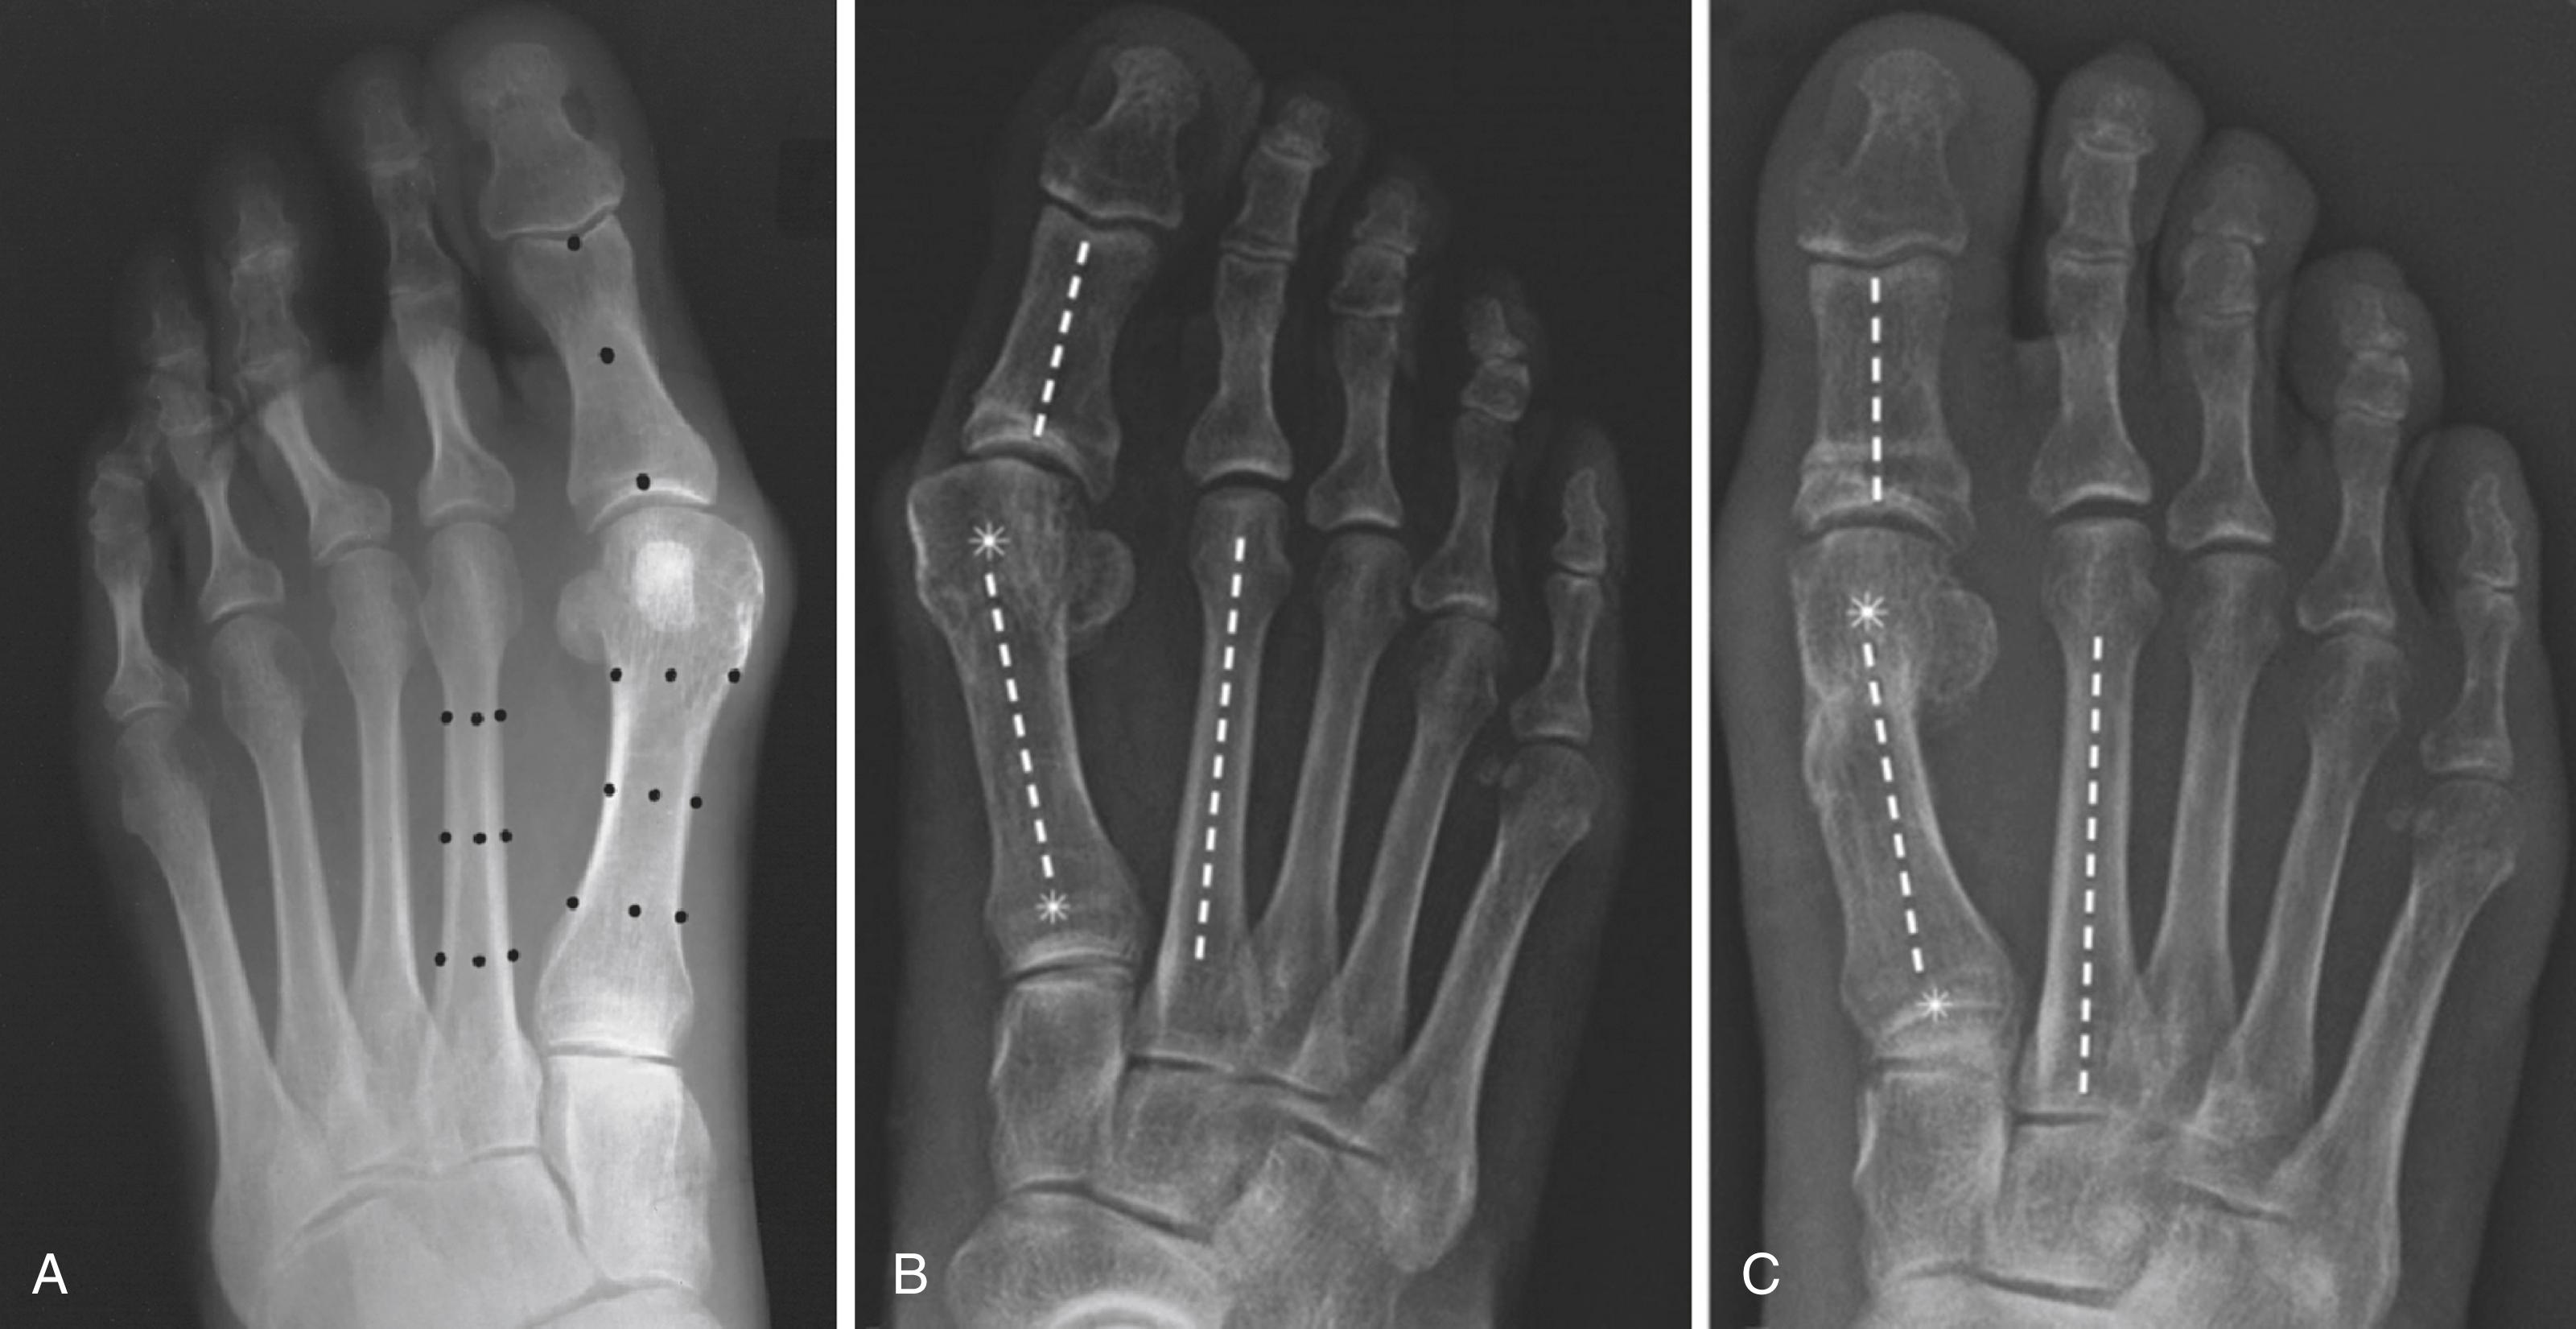 FIGURE 82.10, Method of measuring hallux valgus angle and intermetatarsal angle. A, Center points are connected; if lines are extended, angles are defined. Most current Picture Archiving and Communication Systems (PACS) have functions that determine angles. B and C, Center-head technique of intermetatarsal angle measurement versus preoperative shaft measurement technique.